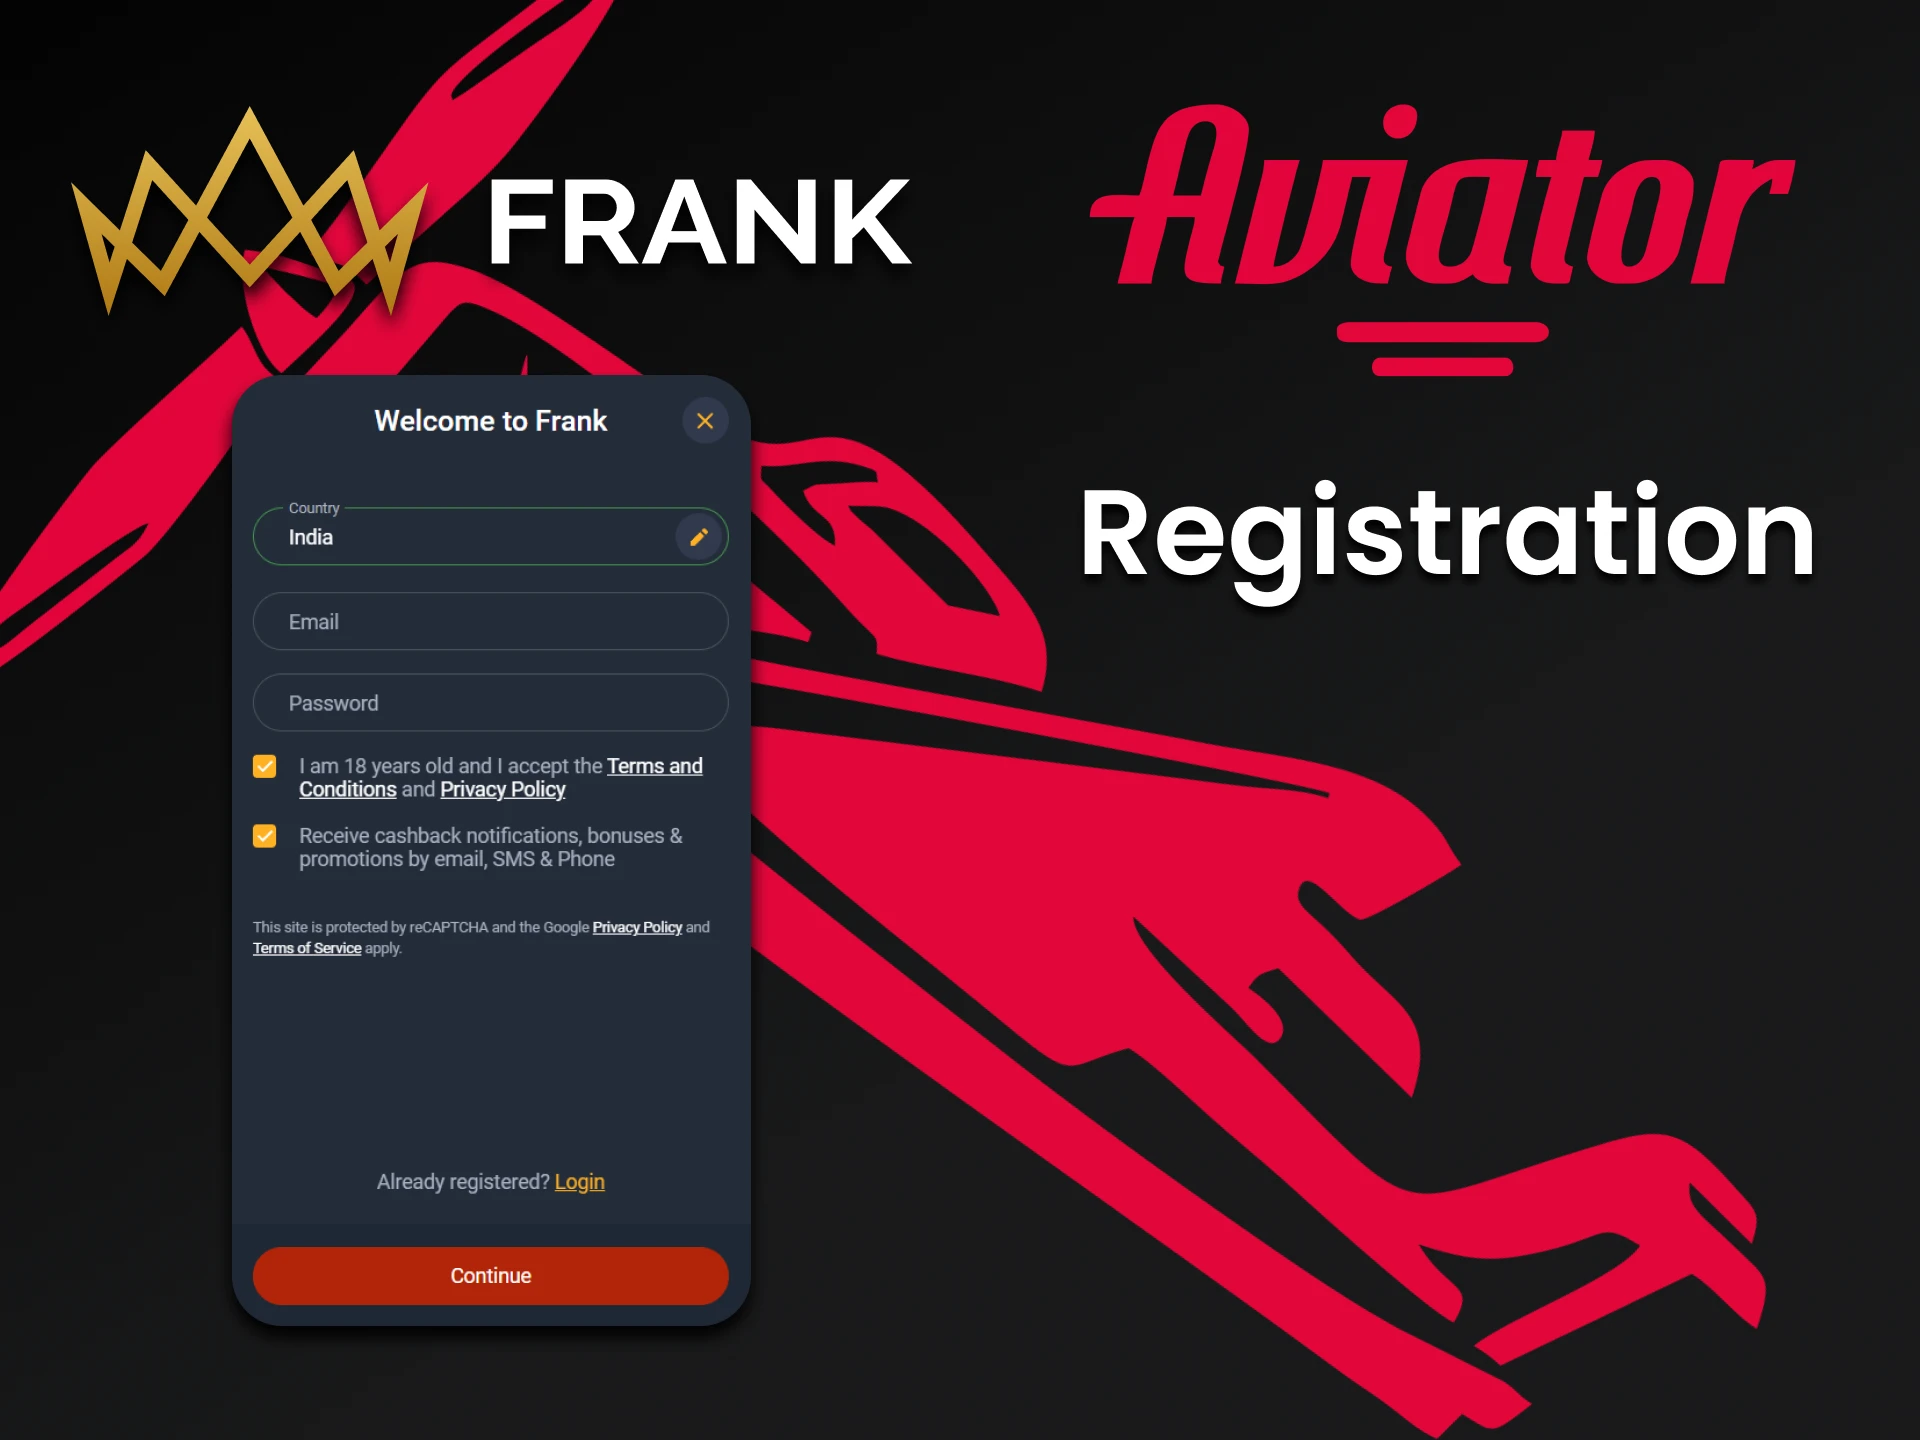 Fill out the registration form to play Aviator at Frank Casino.